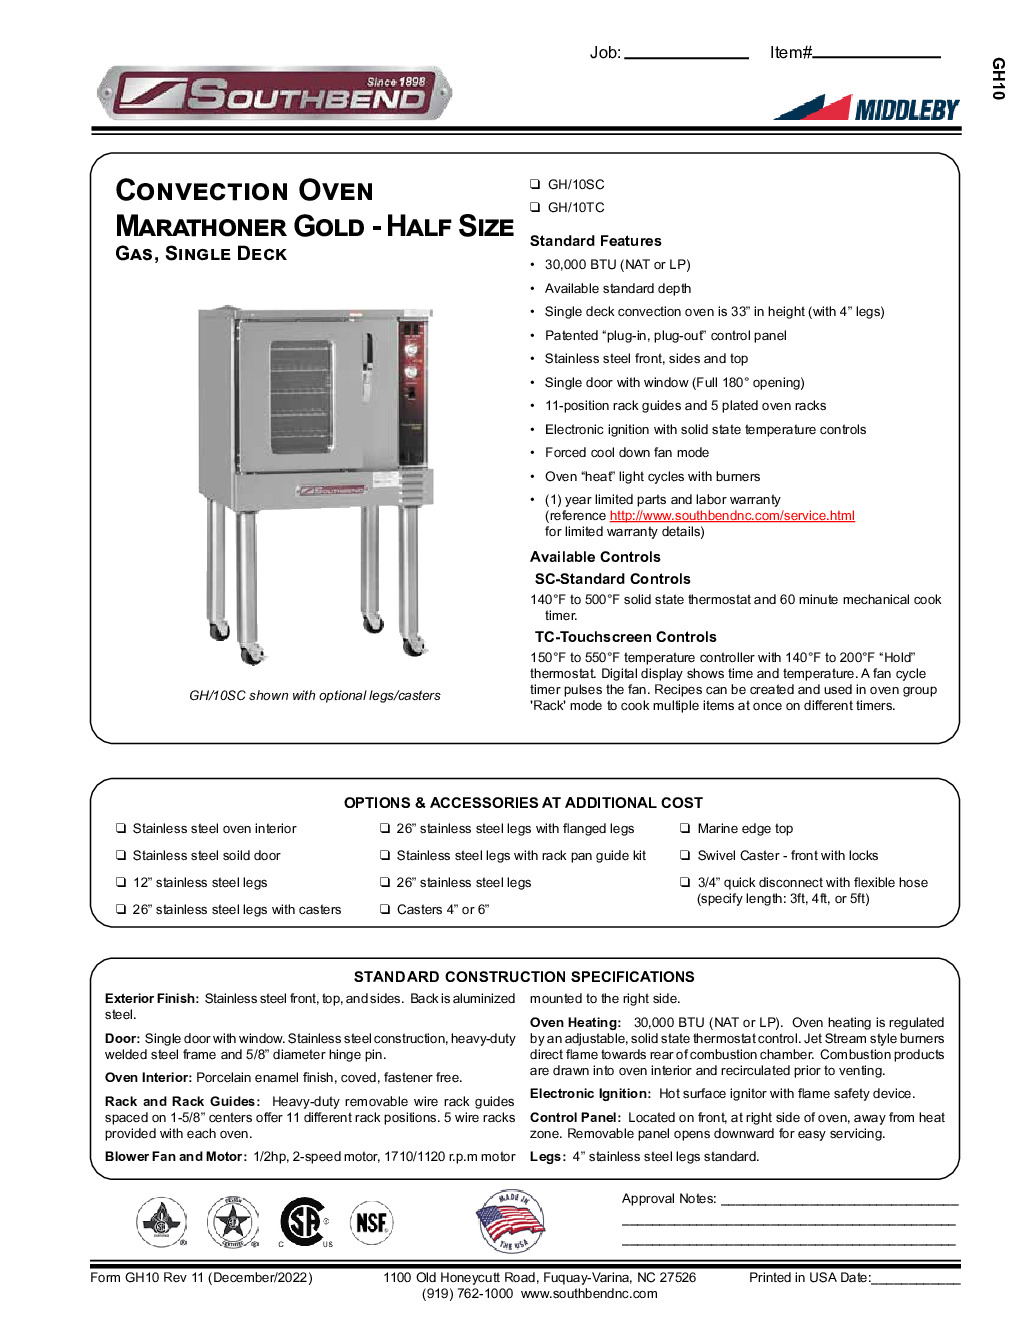 Southbend GH/10TC Single-Deck Half-Size Gas Convection Oven w/ Touch Screen Controls